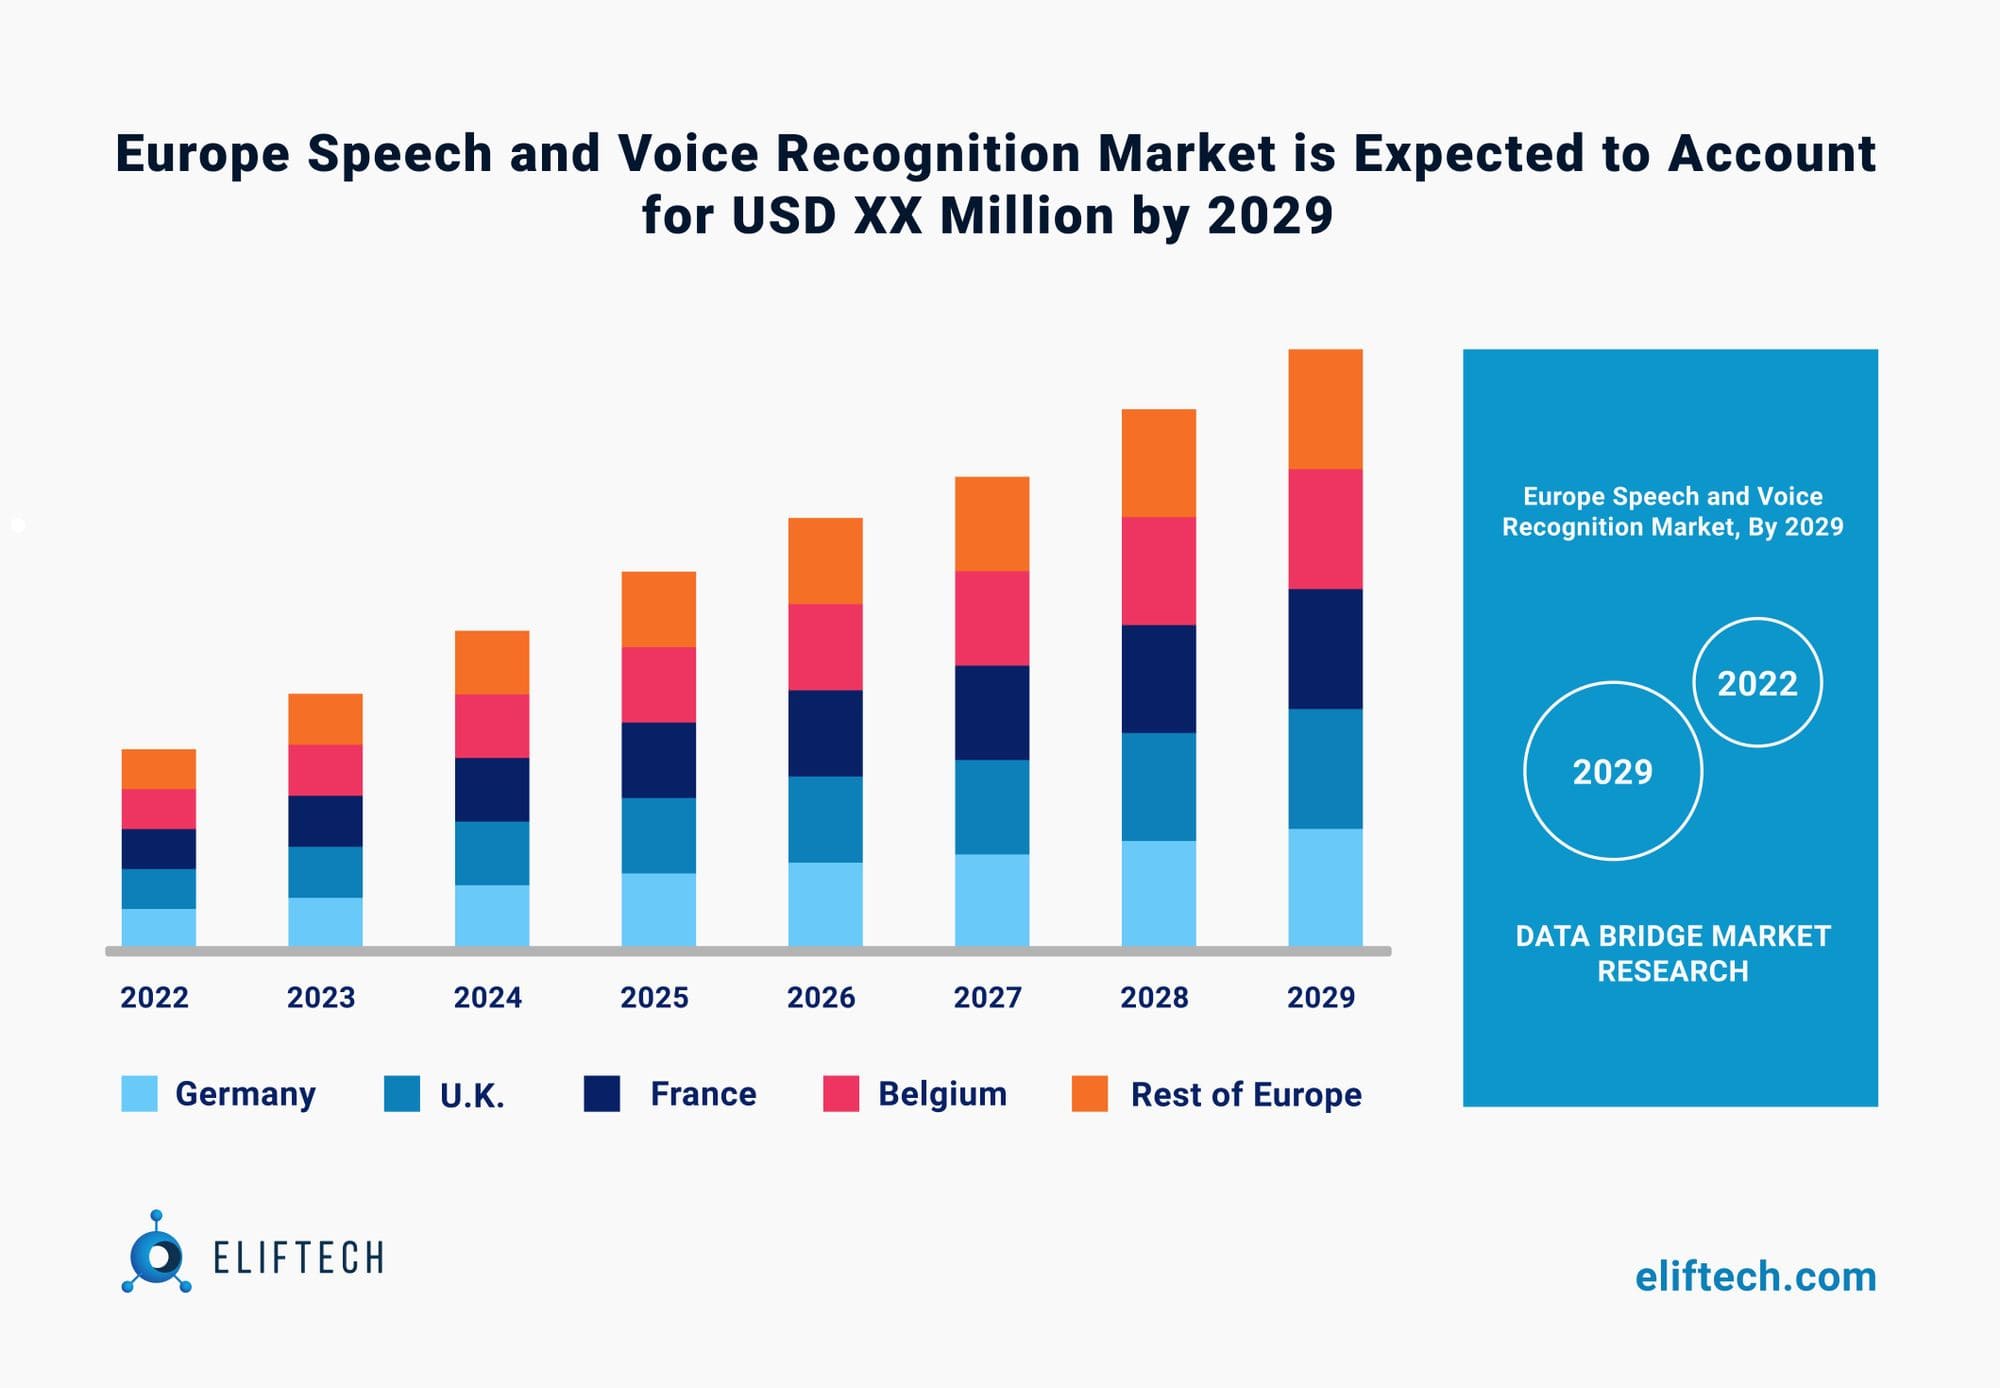 Europe Speech and Voice Recognition Market